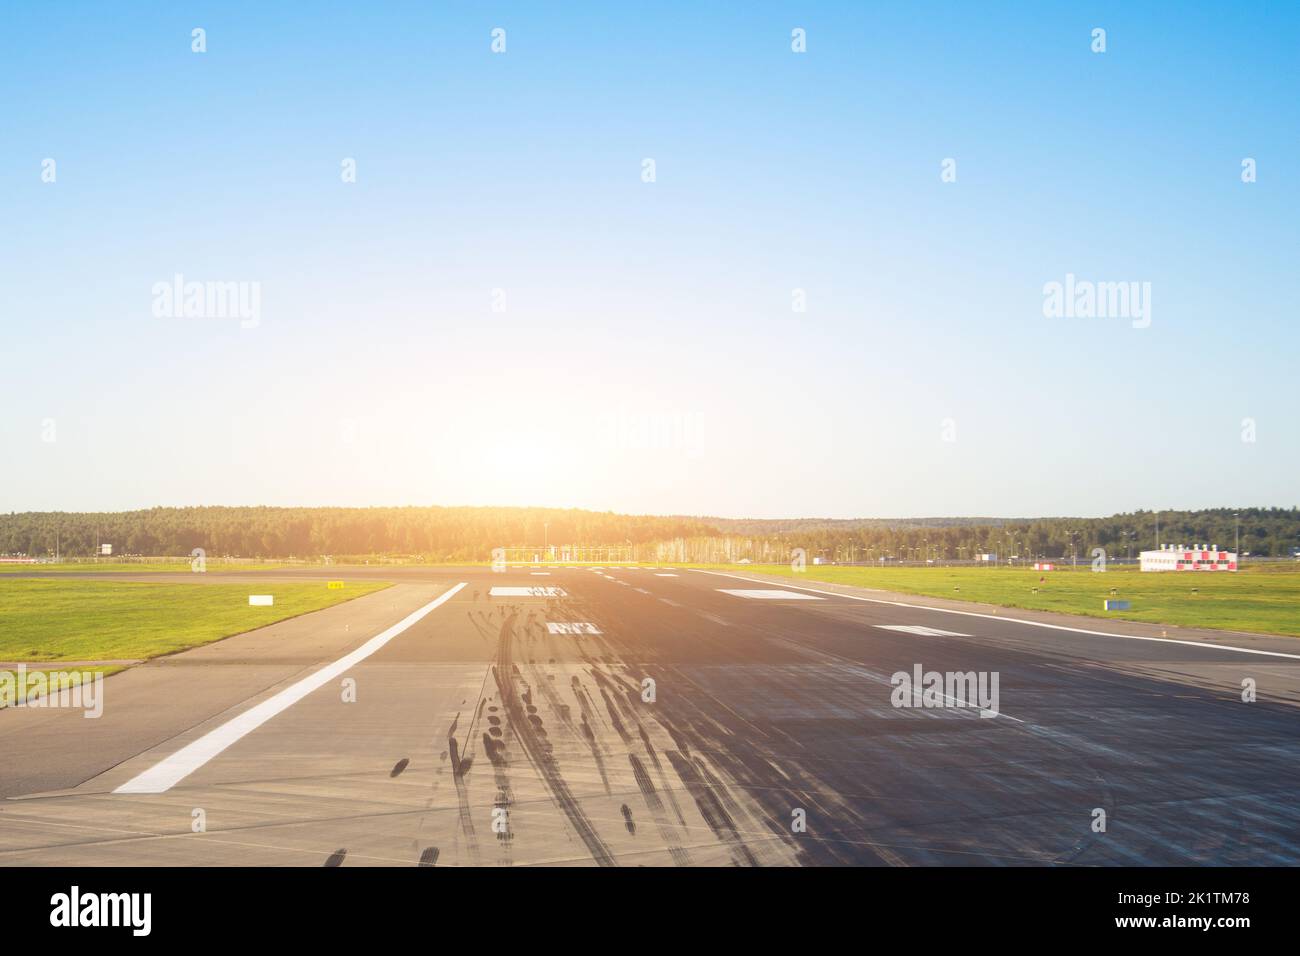 Empty free runway at the airport, ready to take off, landing aircraft Stock Photo